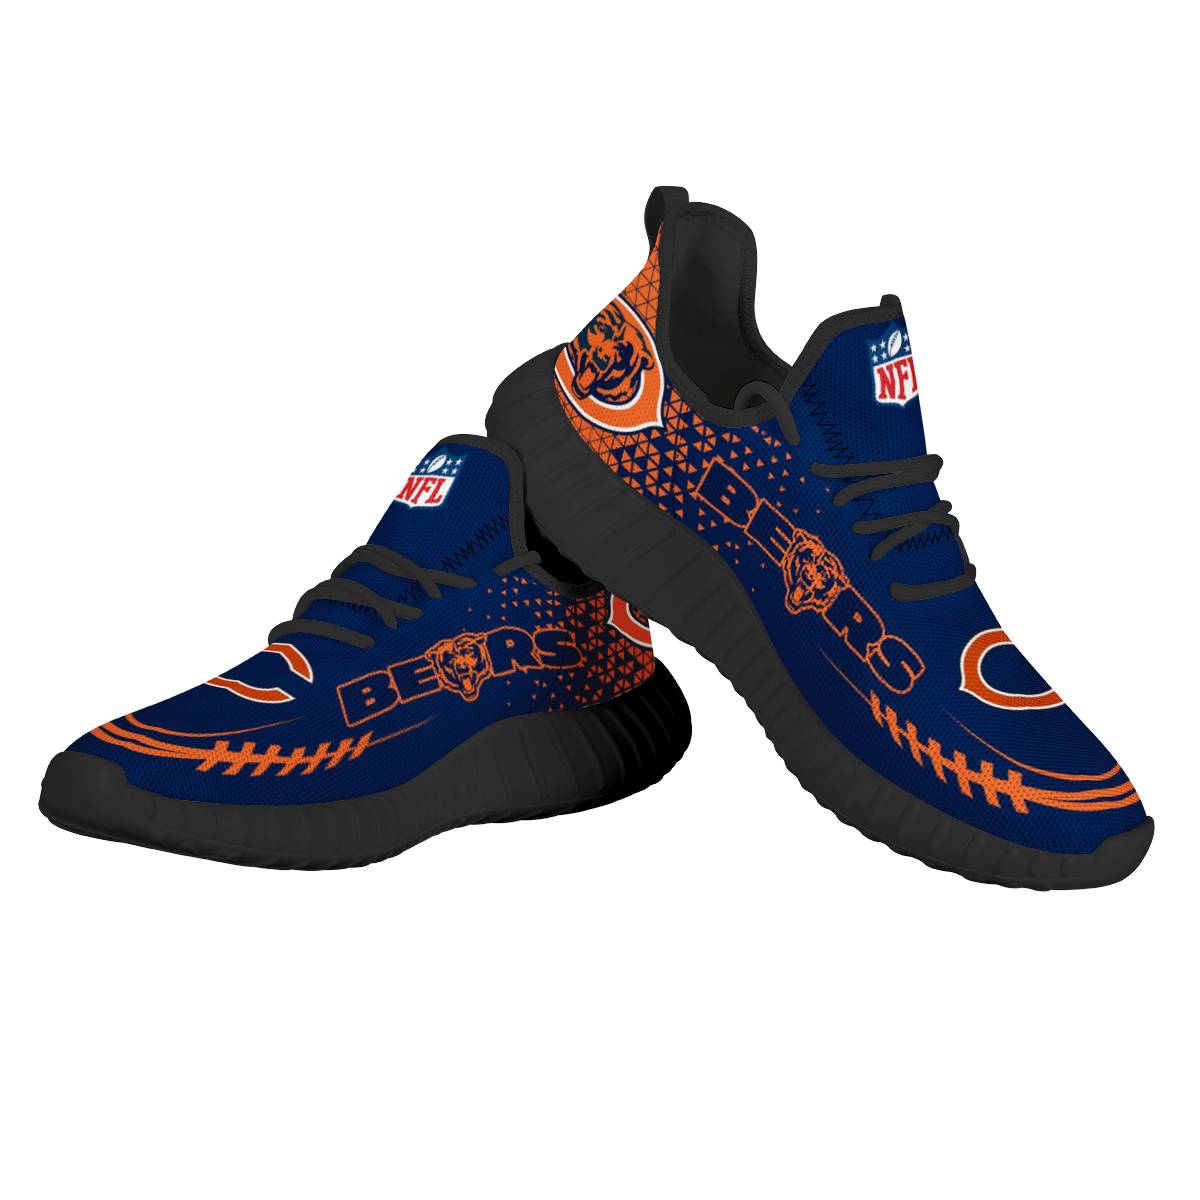 Men's NFL Chicago Bears Mesh Knit Sneakers/Shoes 006